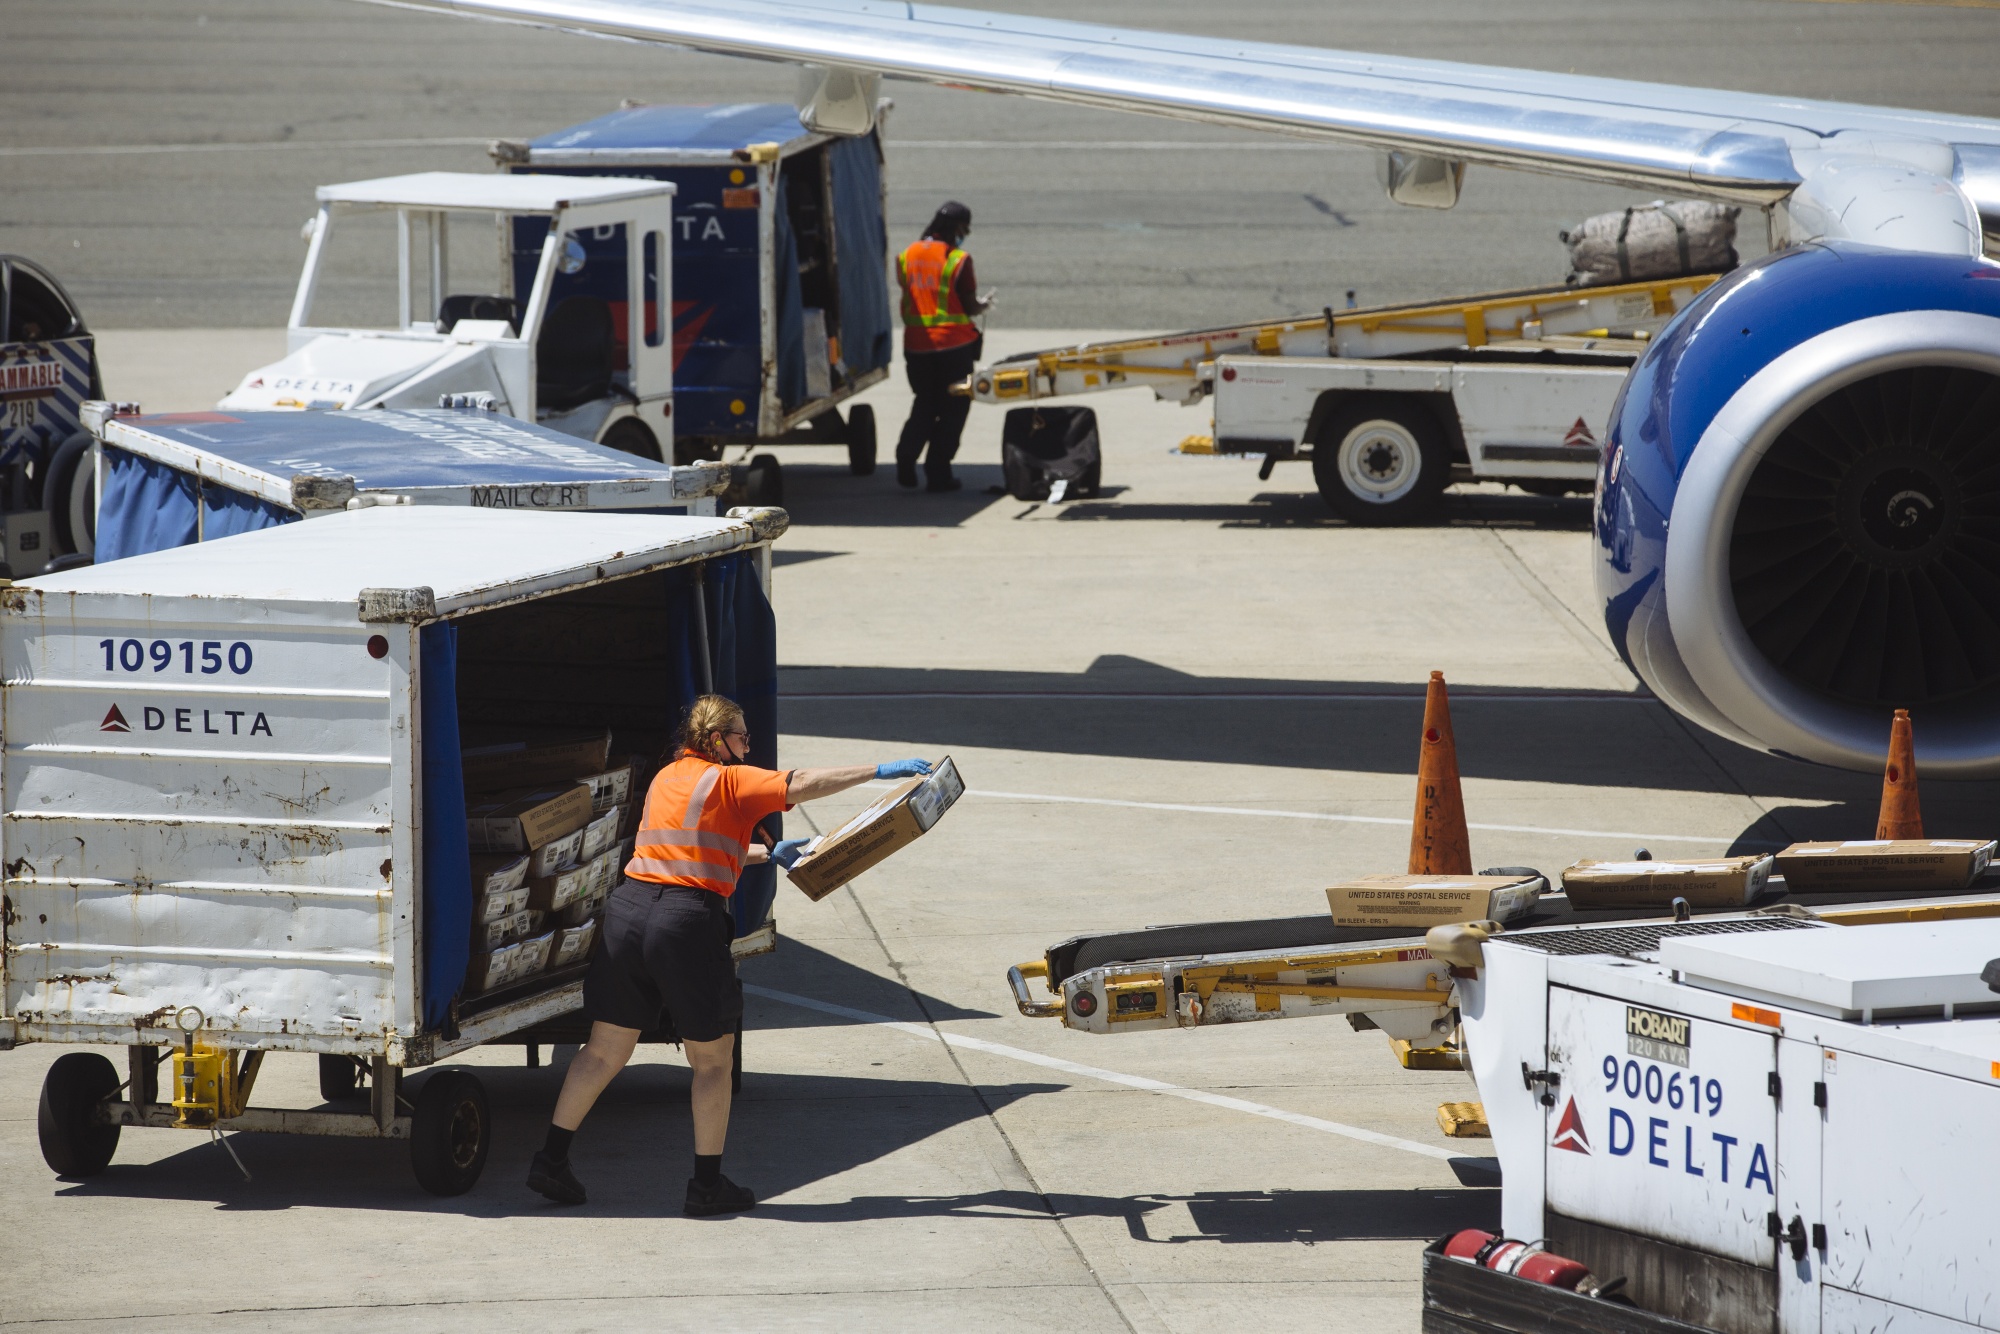 Jobs Are Being Wiped Out at Airlines, And There’s Worse to Come - Bloomberg